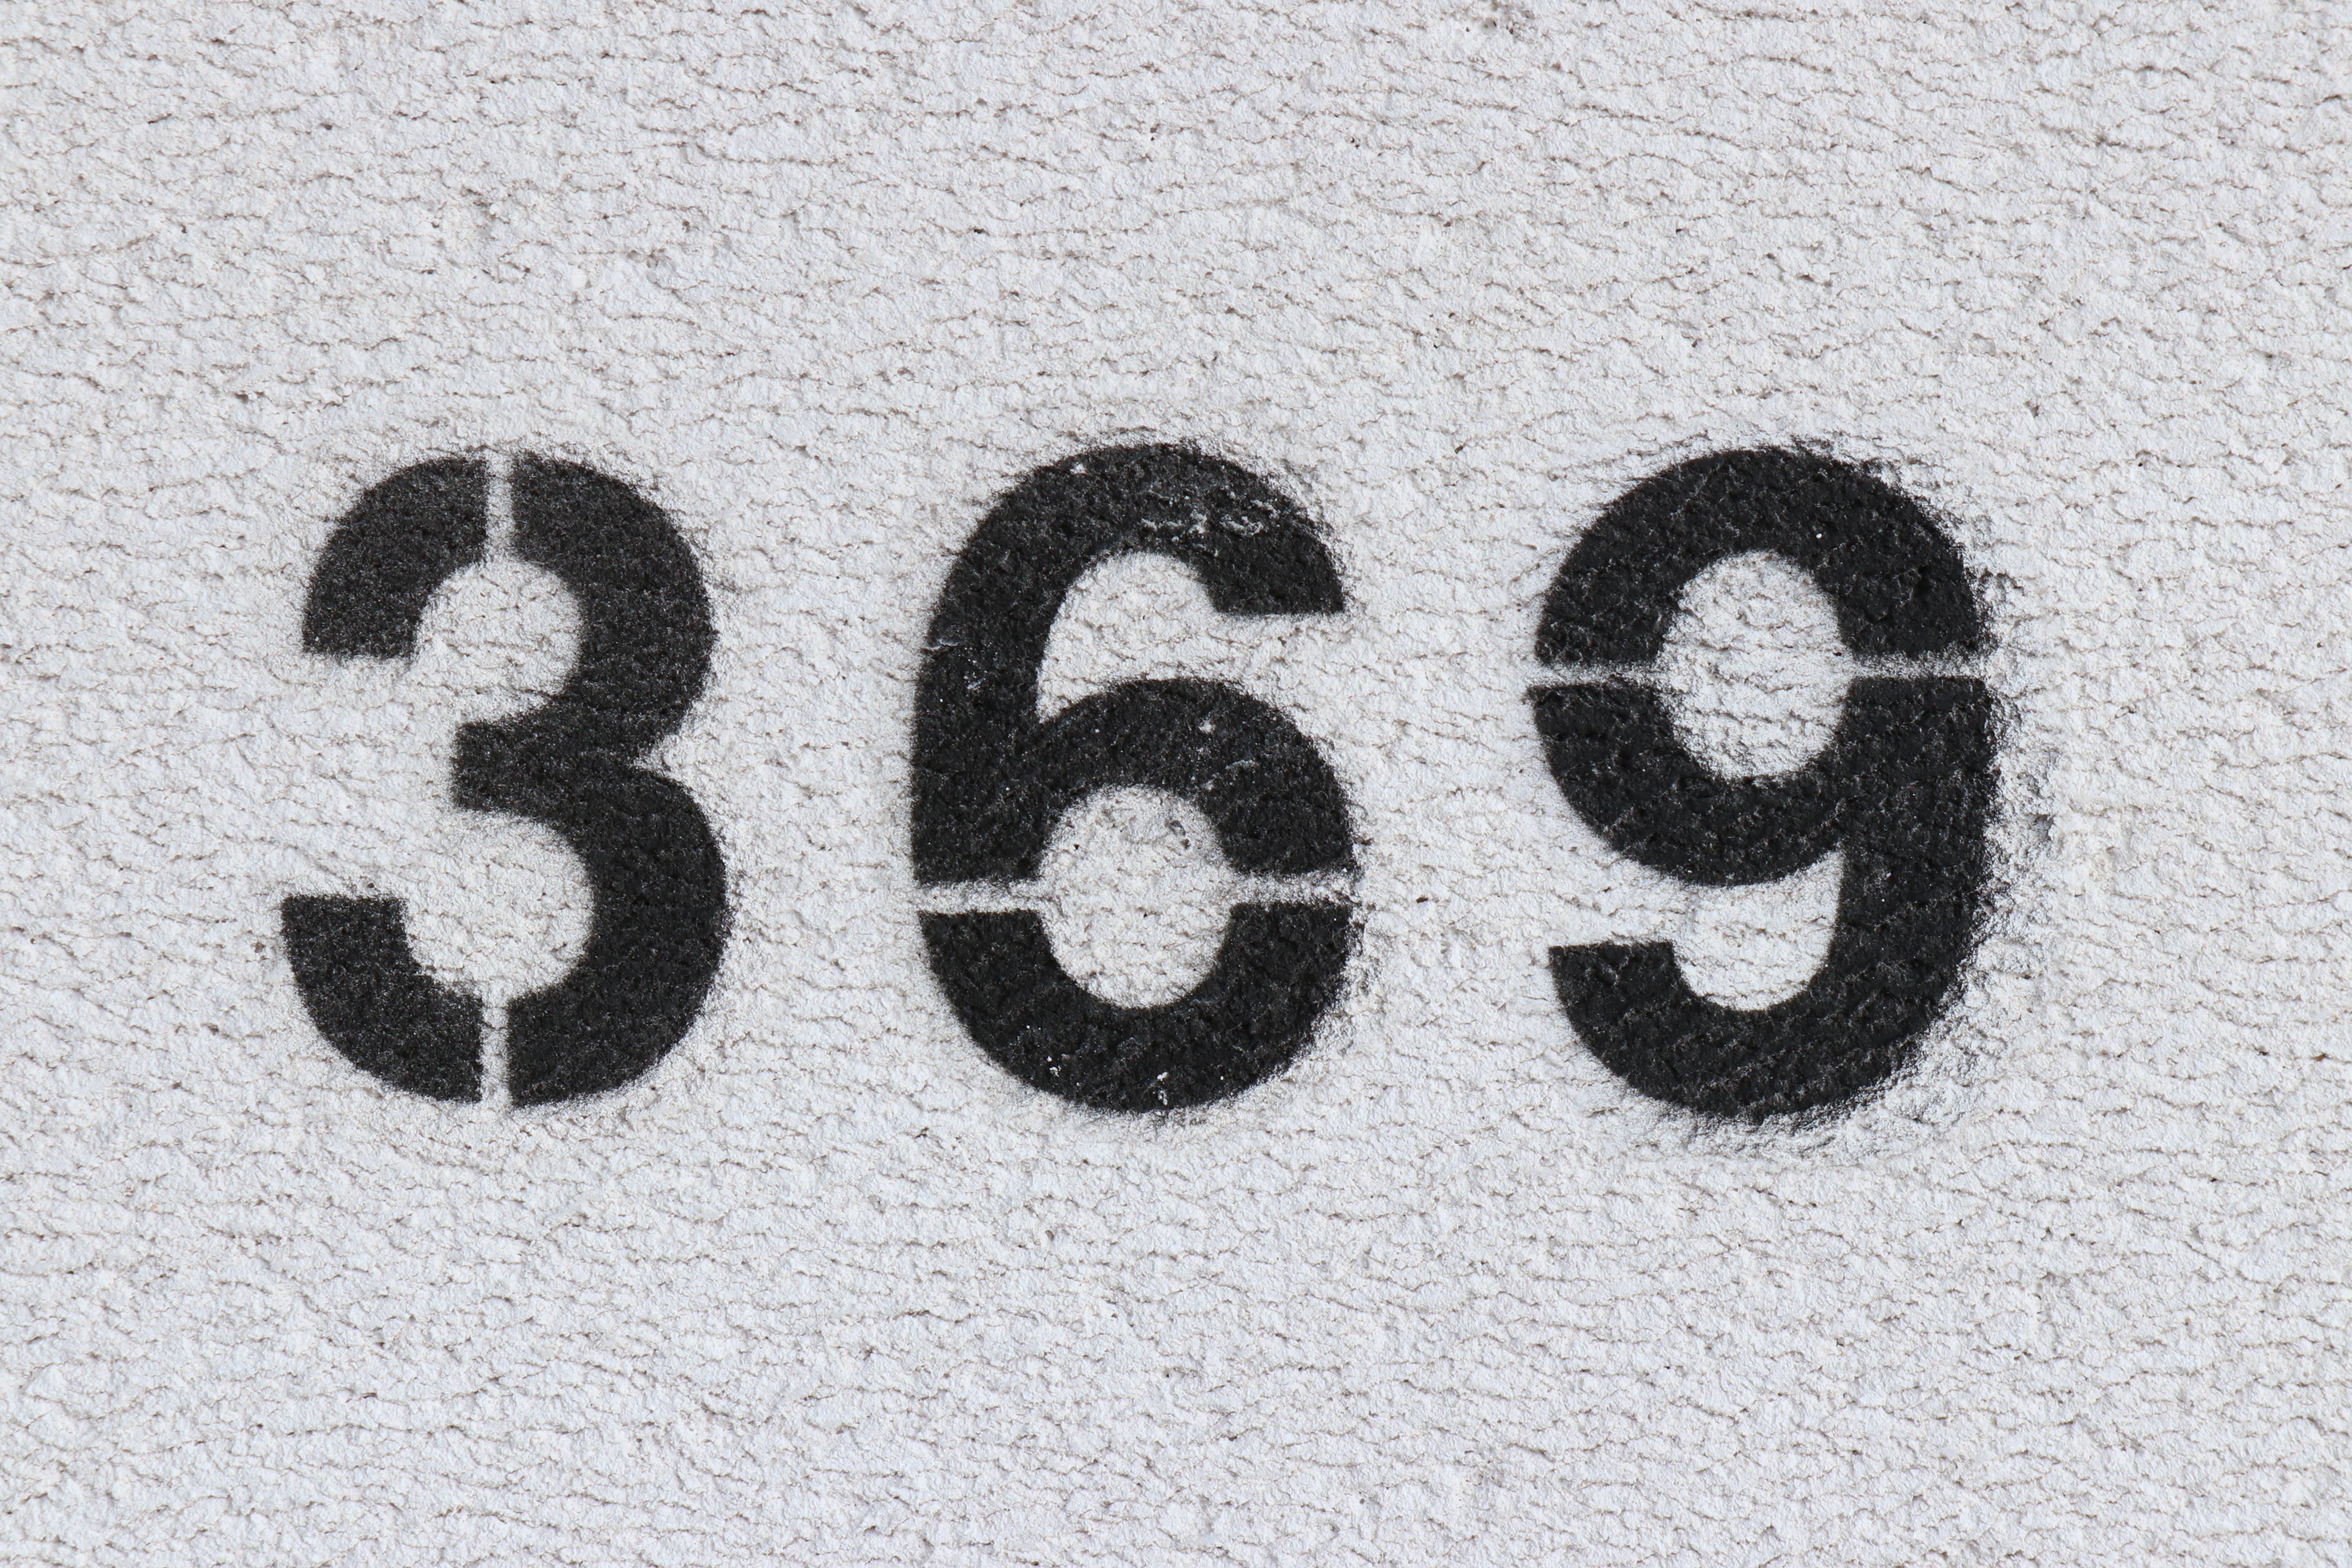 The numbers 3 6 and 9 written in black on a white background